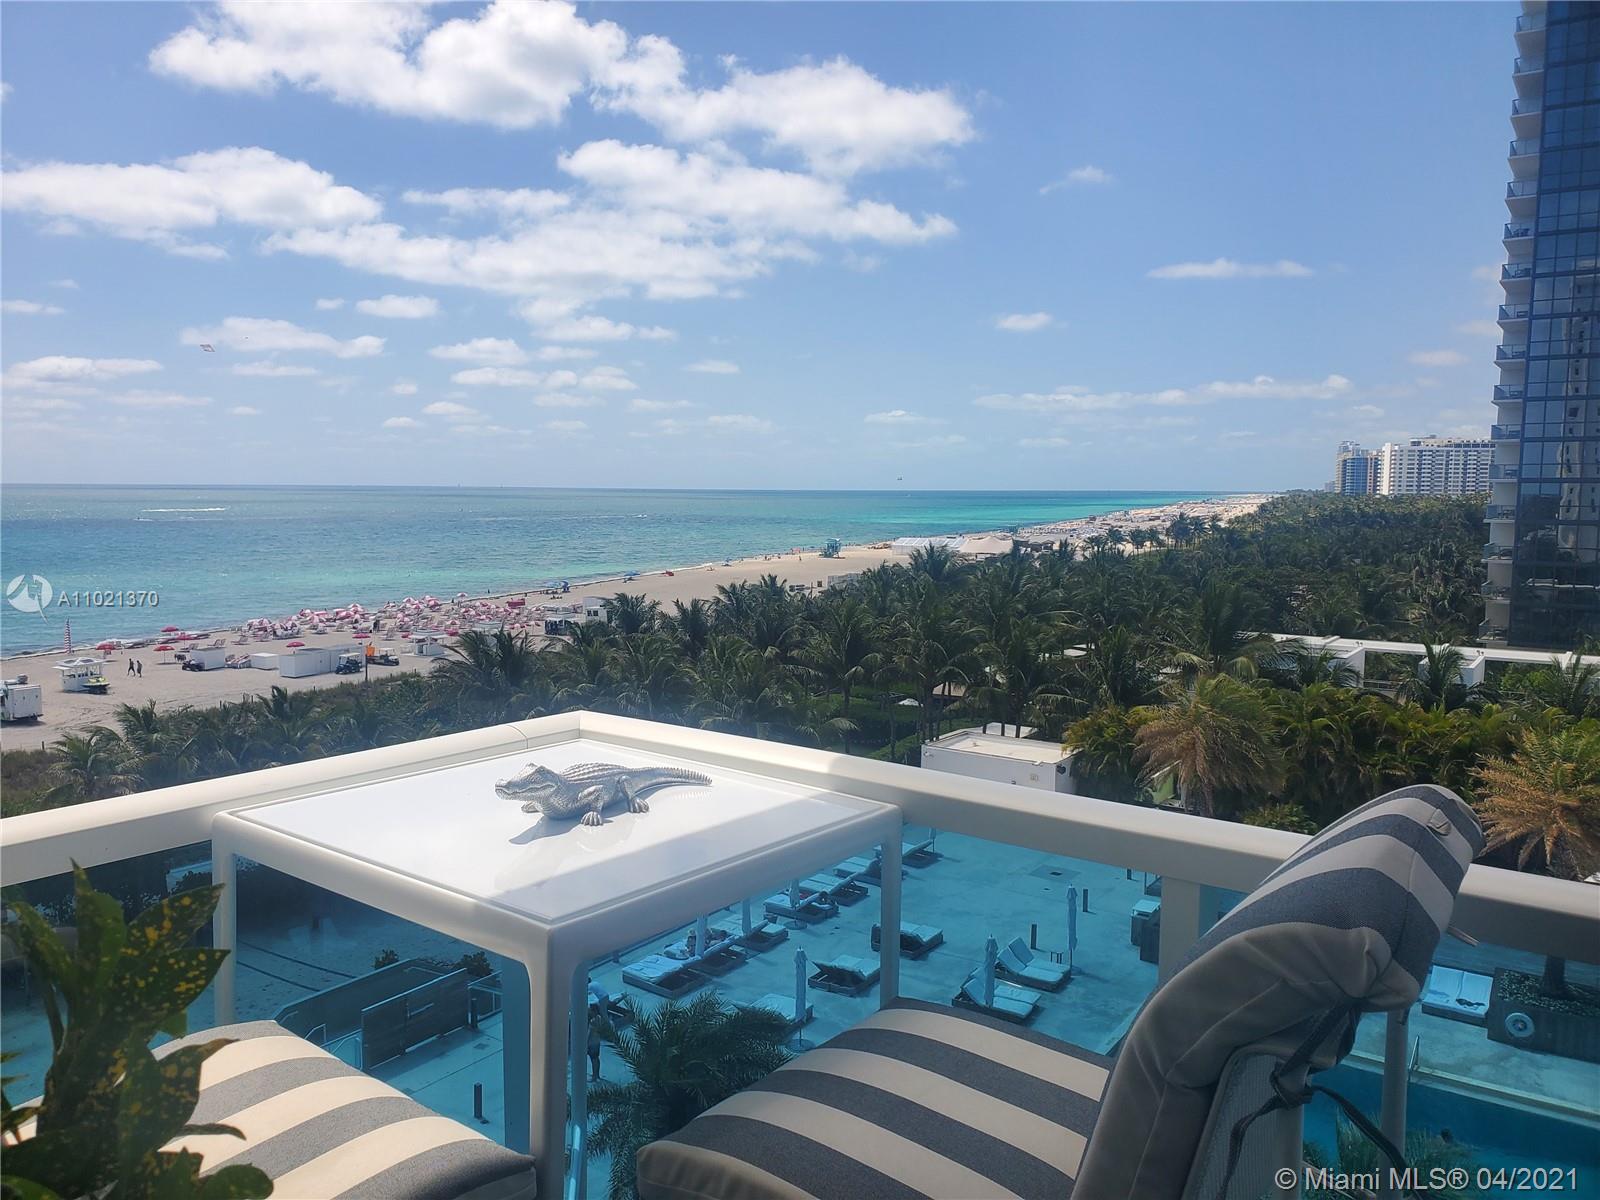 DREAMY two bedroom Two Bathroom ONE OF A KIND UNIT IN THE RONEY PALACE for sale. 
Remodeled and updated. STUNNING OCEAN VIEW all the way to South Point 
Close to Lincoln road and all the other attractions South Beach has to offer. This Unit can be rented monthly. Water, 1x valet spot, internet and cable are included in the HOA. Use the 5 Star amenities of the 1 hotel. This includes 3 oceanfront pools, Jacuzzi, Beach Bar, Towel & beverage services, 24 hr security, valet parking. Get discount at the bars and restaurants on site with your access card. Anatomy gym is located in the Roney Palace.
Included 1hotel amenities. Located in the heart of south beach, surrounded by all shops and restaurants.